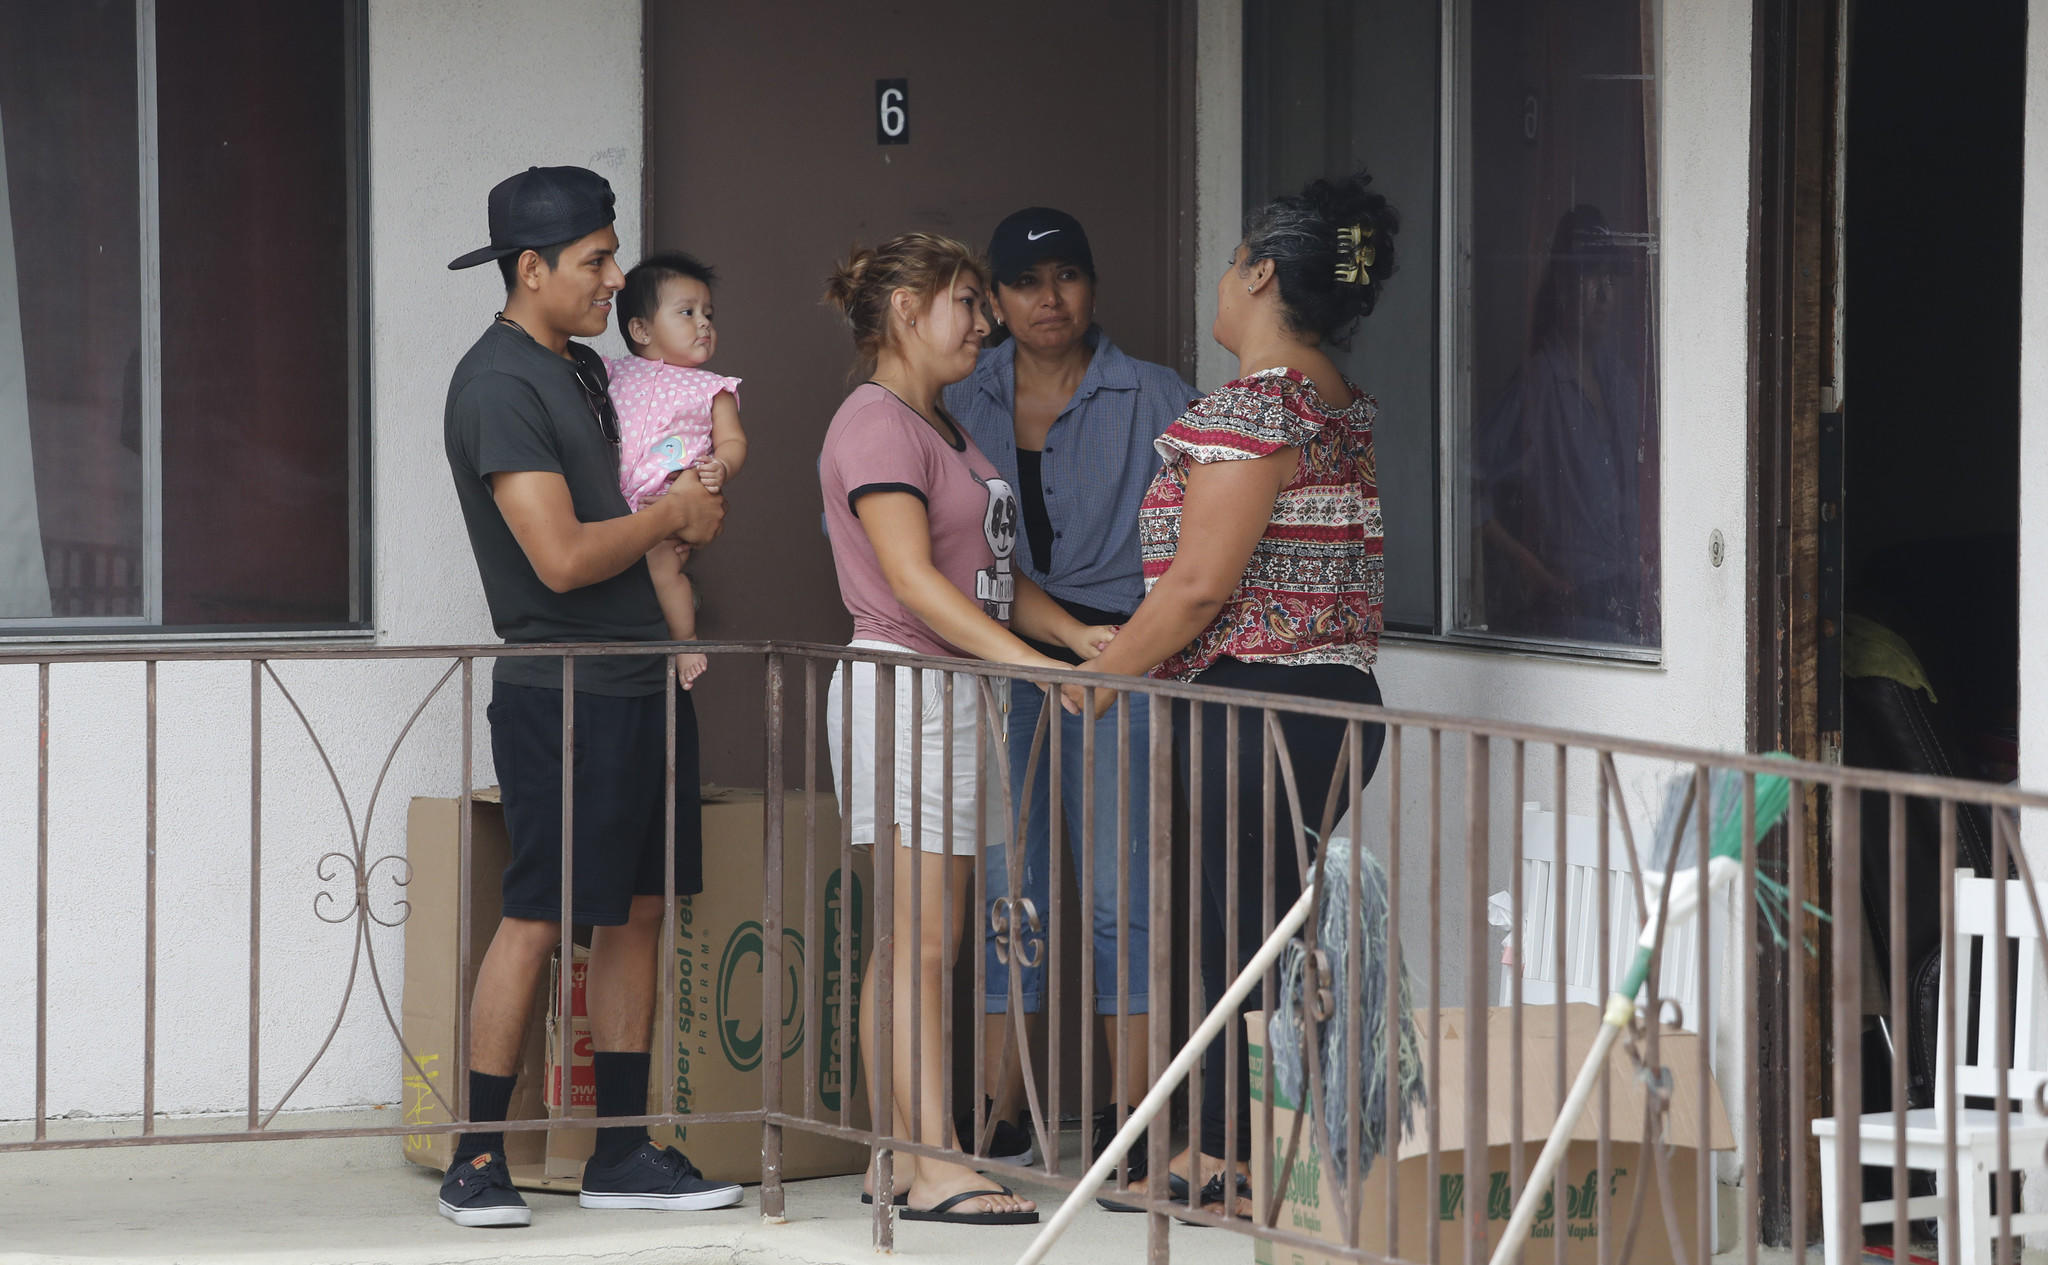 Maria Barrancas, right, bids farewell to neighbors on her family's last day in the United States.